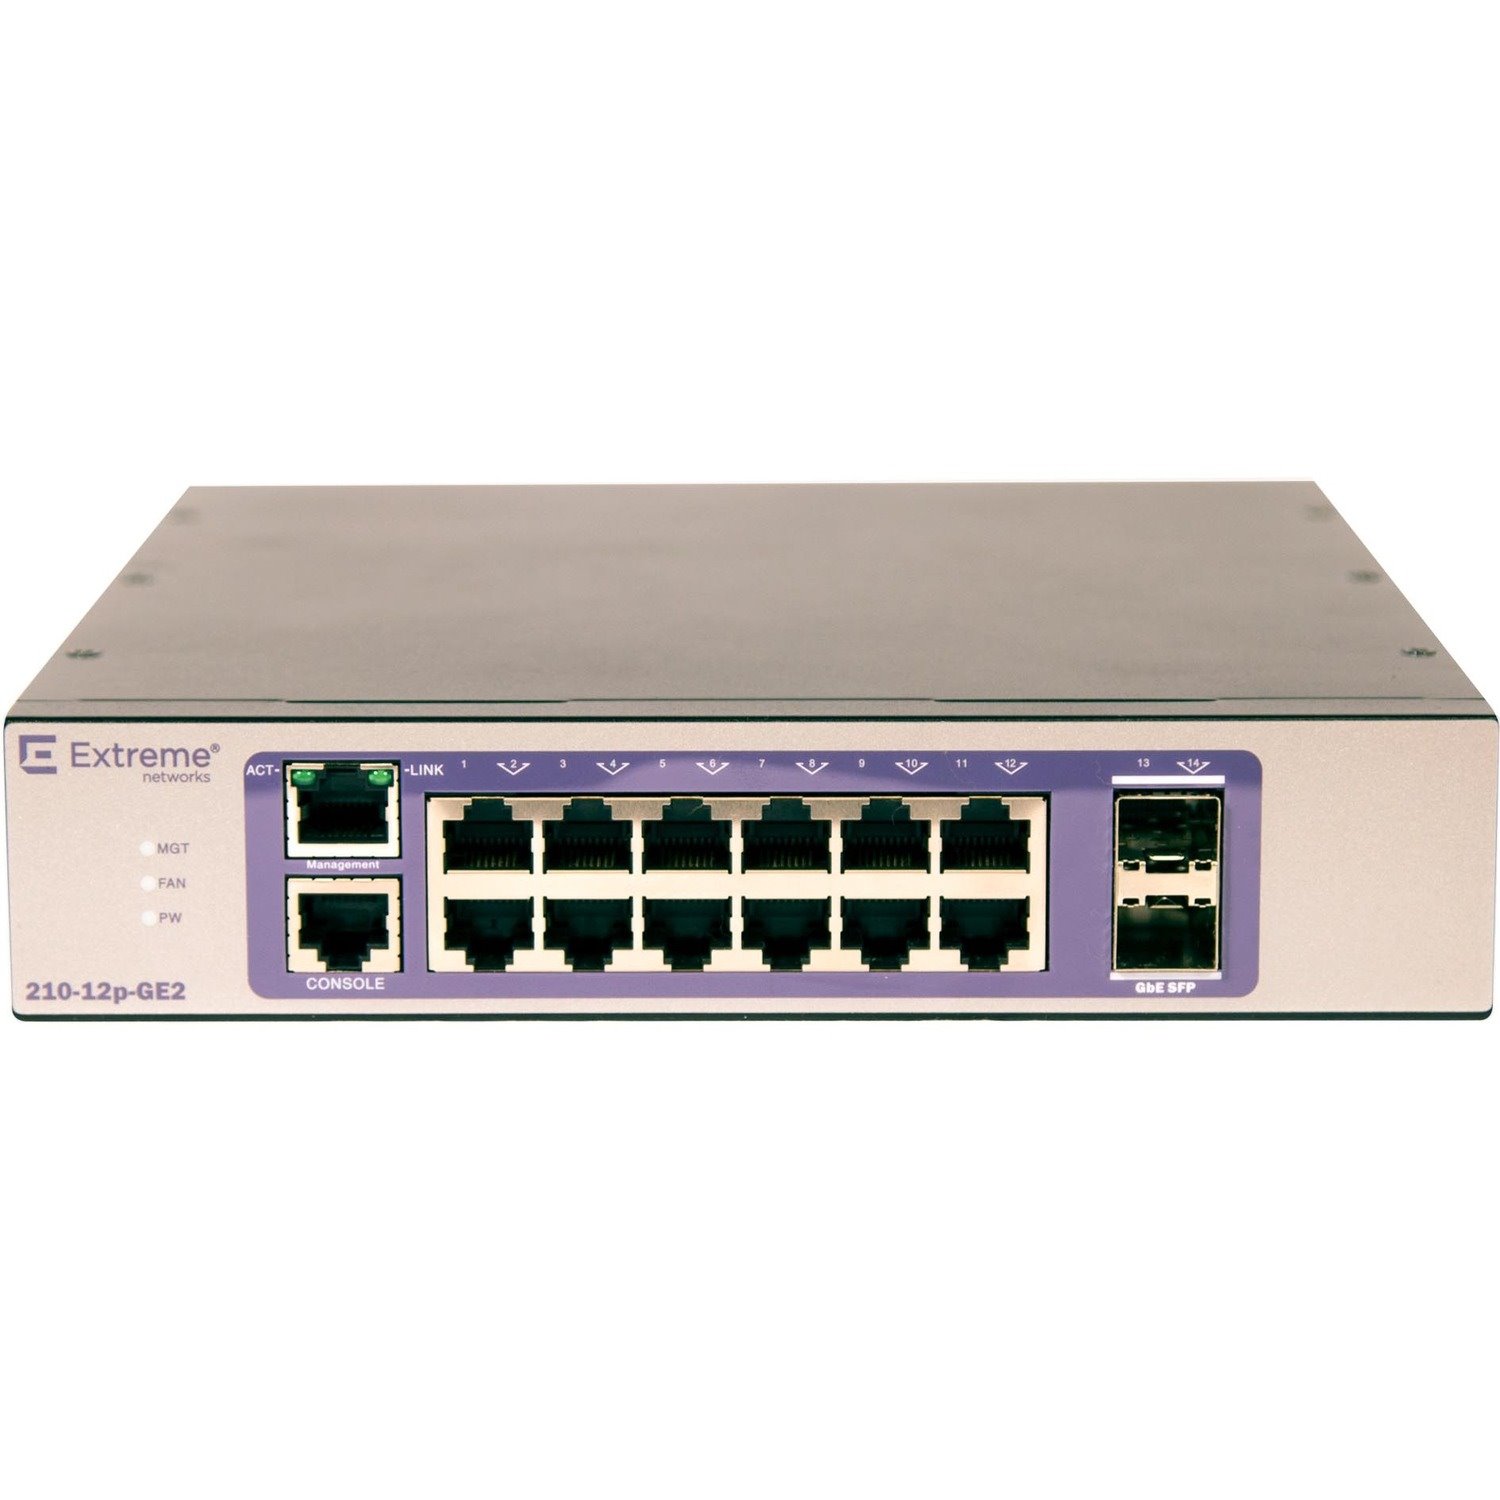 Extreme Networks 210 210-12p-GE2 12 Ports Manageable Ethernet Switch